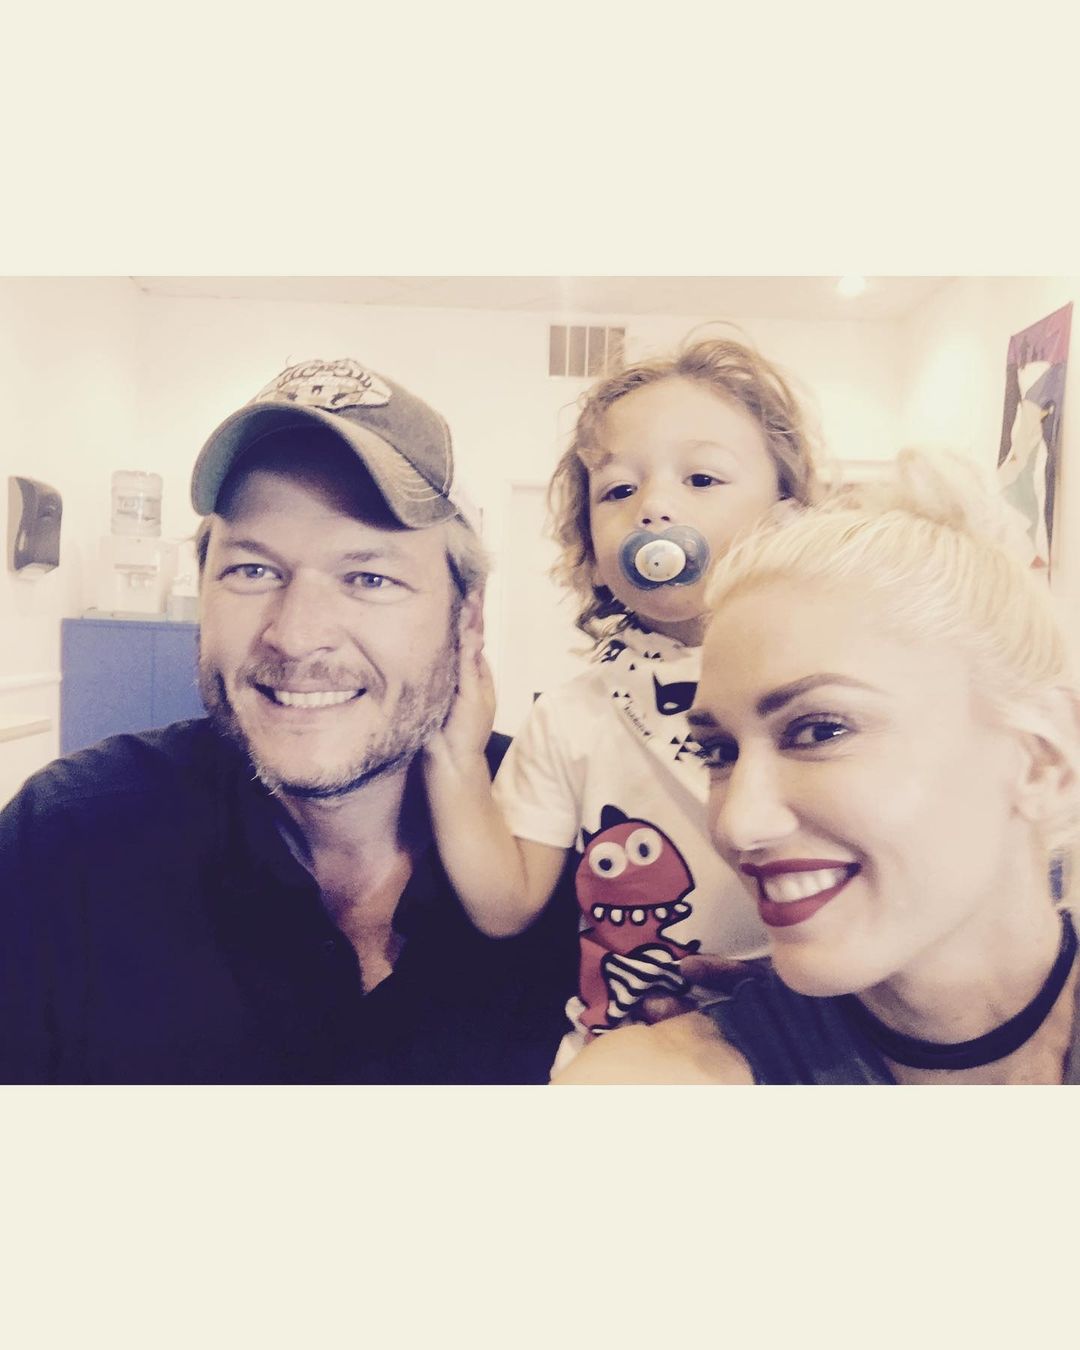 Apollo with Blake and Gwen.